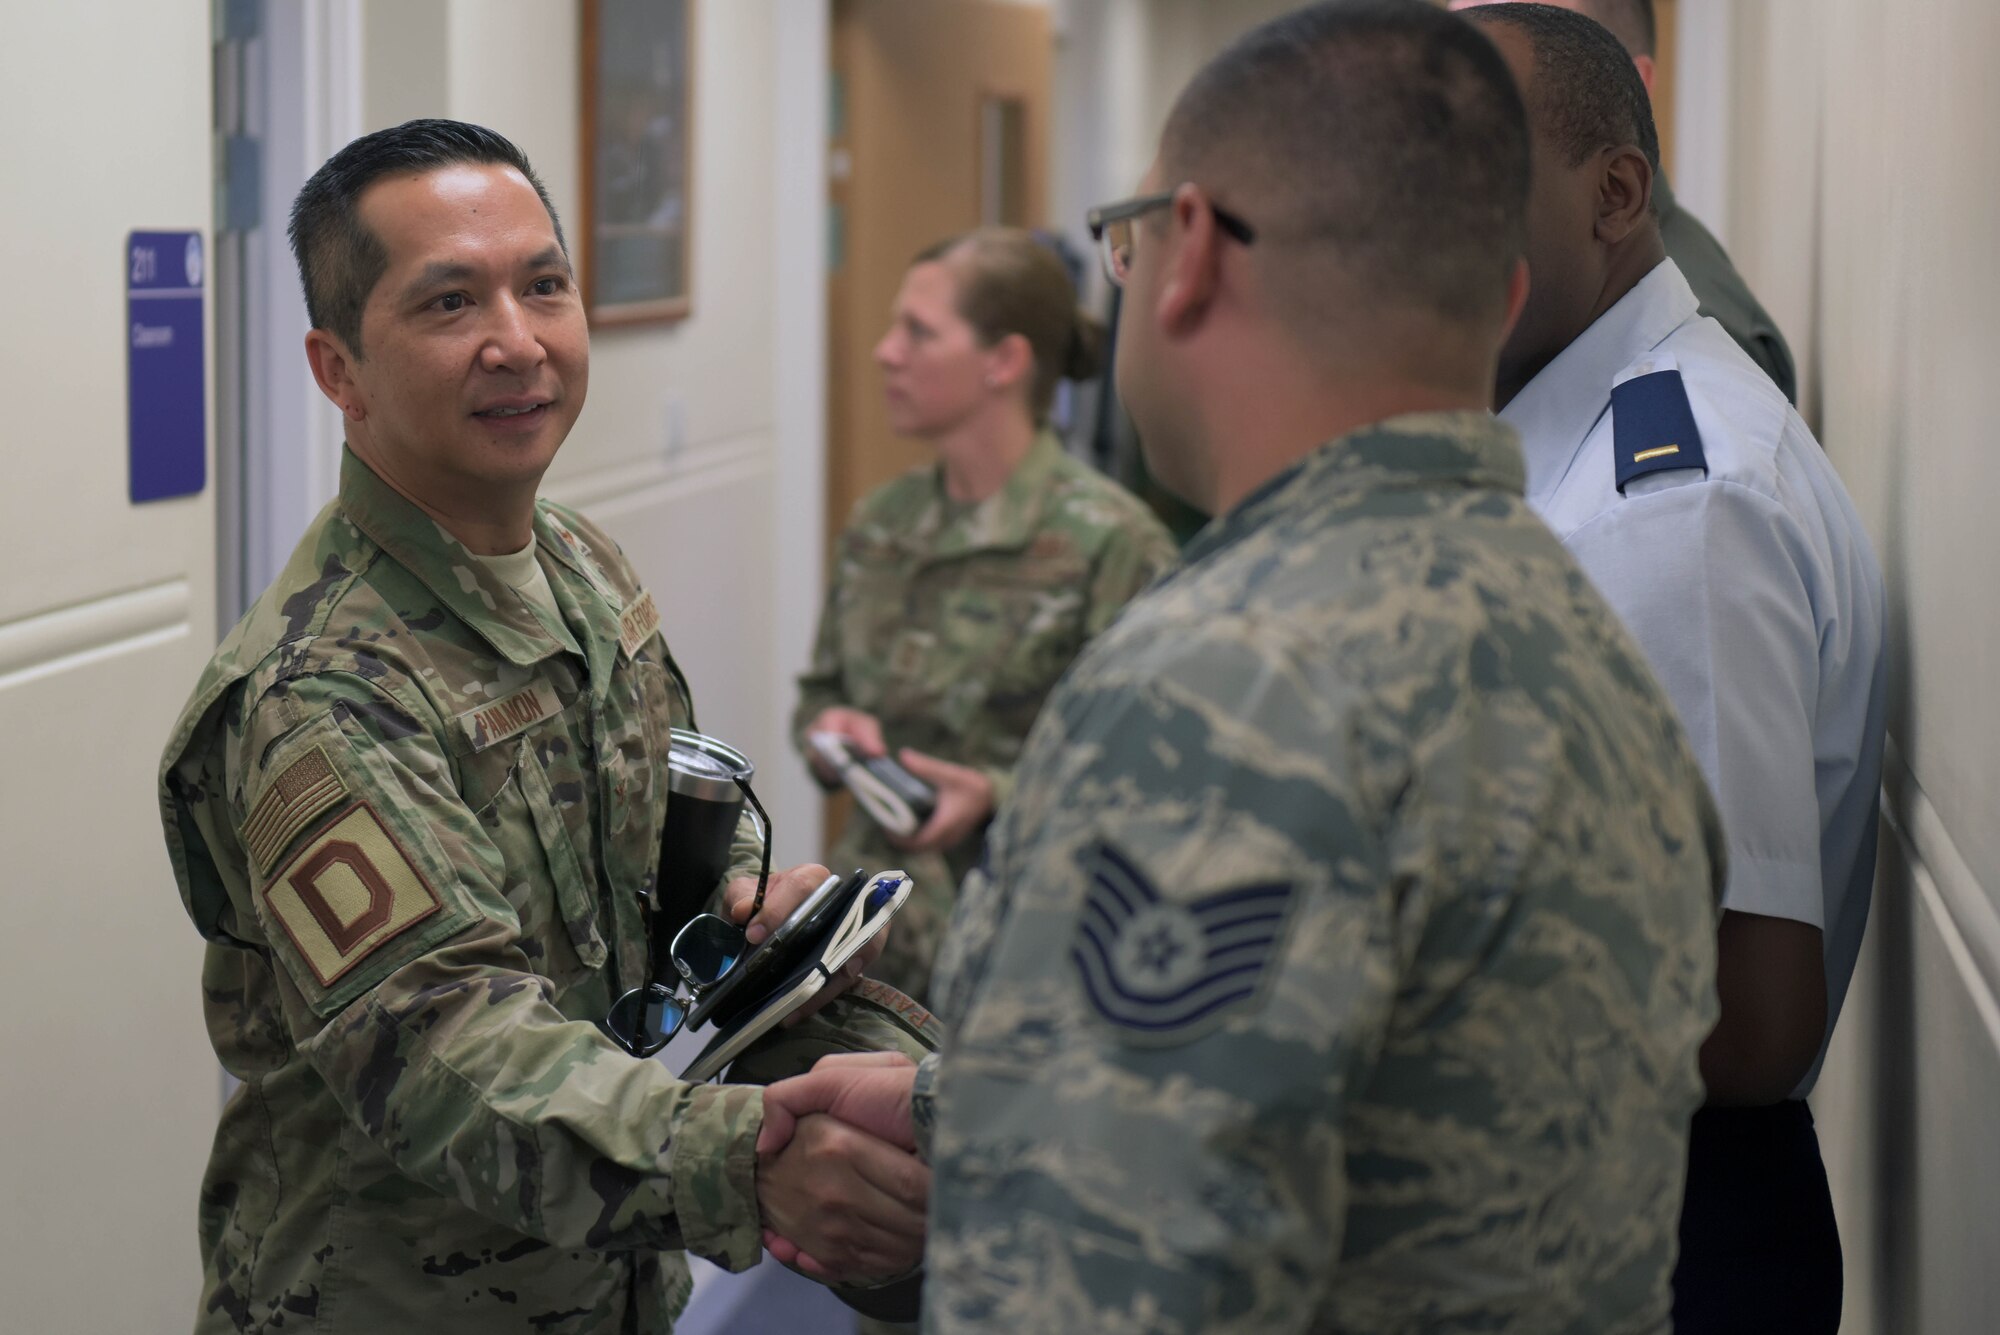 U.S. Air Force Col. Troy Pananon, 100th Air Refueling Wing commander, shakes hands with a 100th ARW Airman at RAF Mildenhall, England, July 9, 2019. Pananon began his military career in the United States Marine Corps, after leaving the USMC he completed his education and earned his commission in the Air Force. (U.S. Air Force photo by Senior Airman Benjamin Cooper)